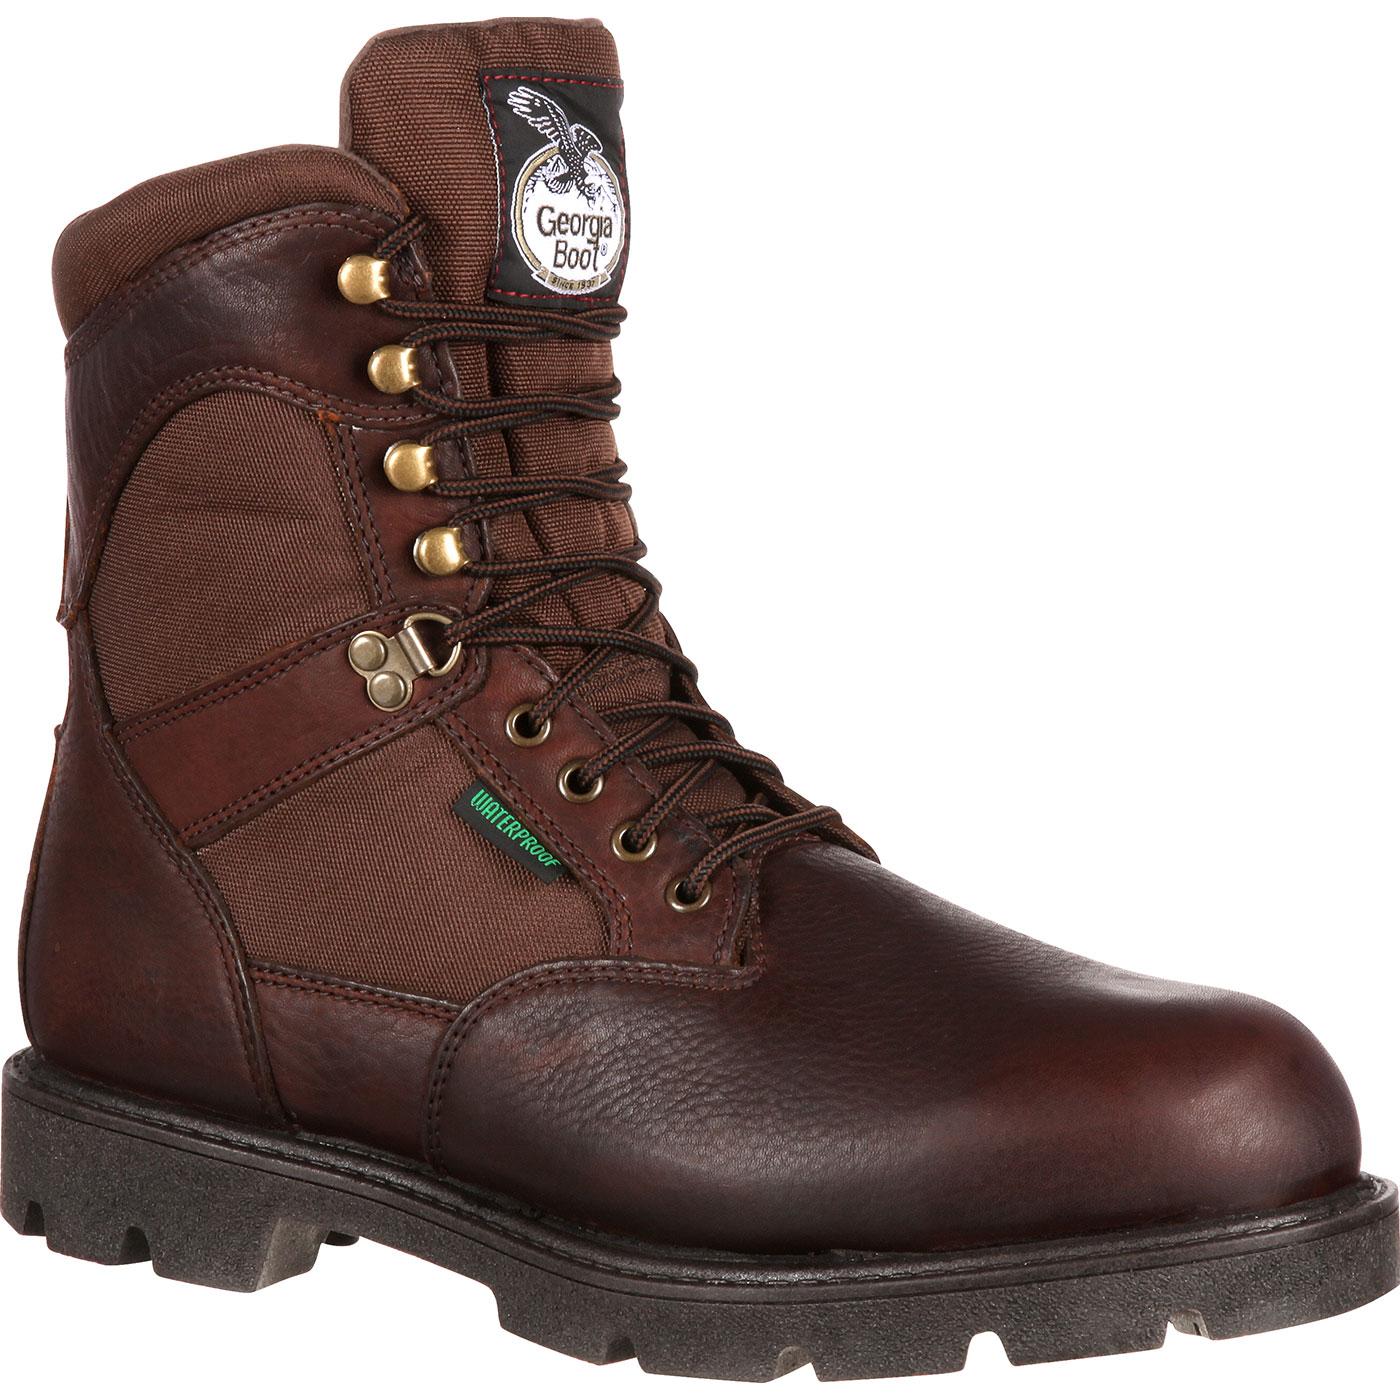 600g insulated work boots